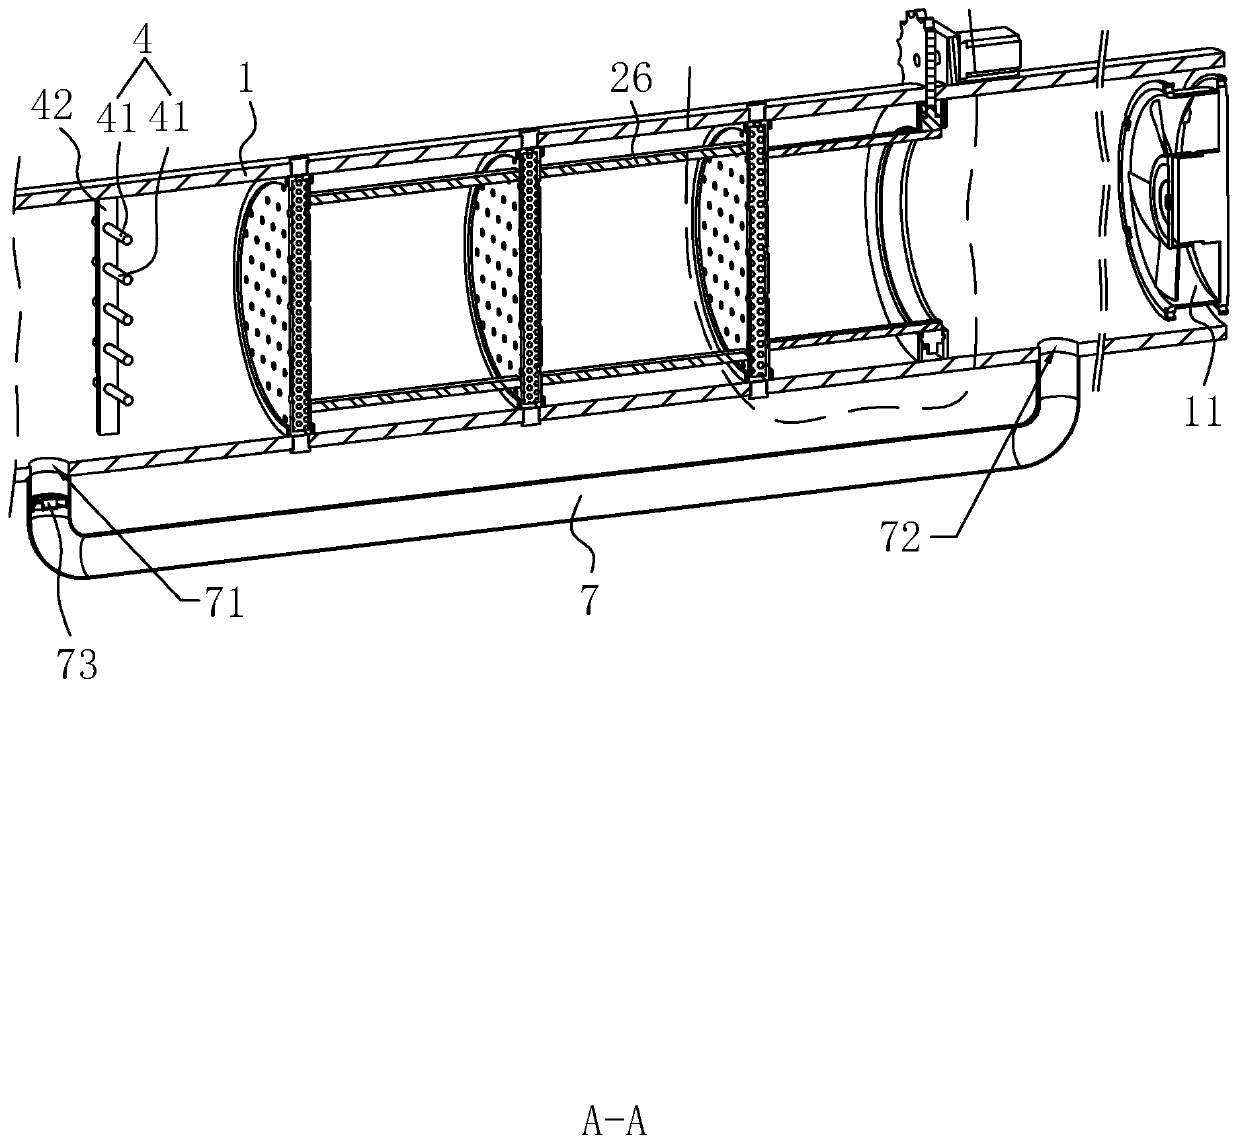 Frozen chicken production process and air purification equipment for production thereof